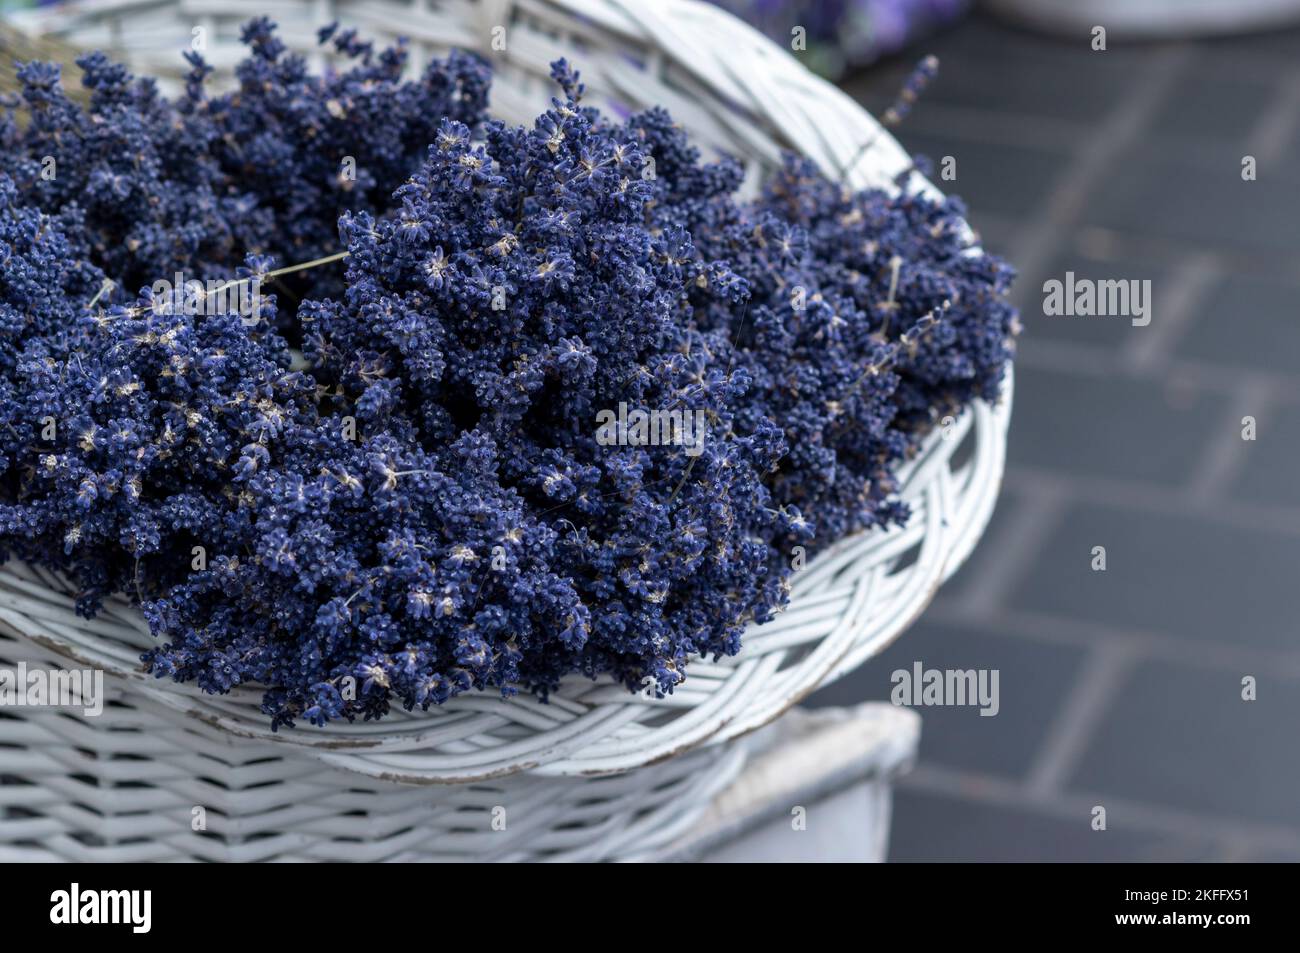 A basket of freshly harvested fragrant purple French lavender, agriculture and harvesting concept Stock Photo